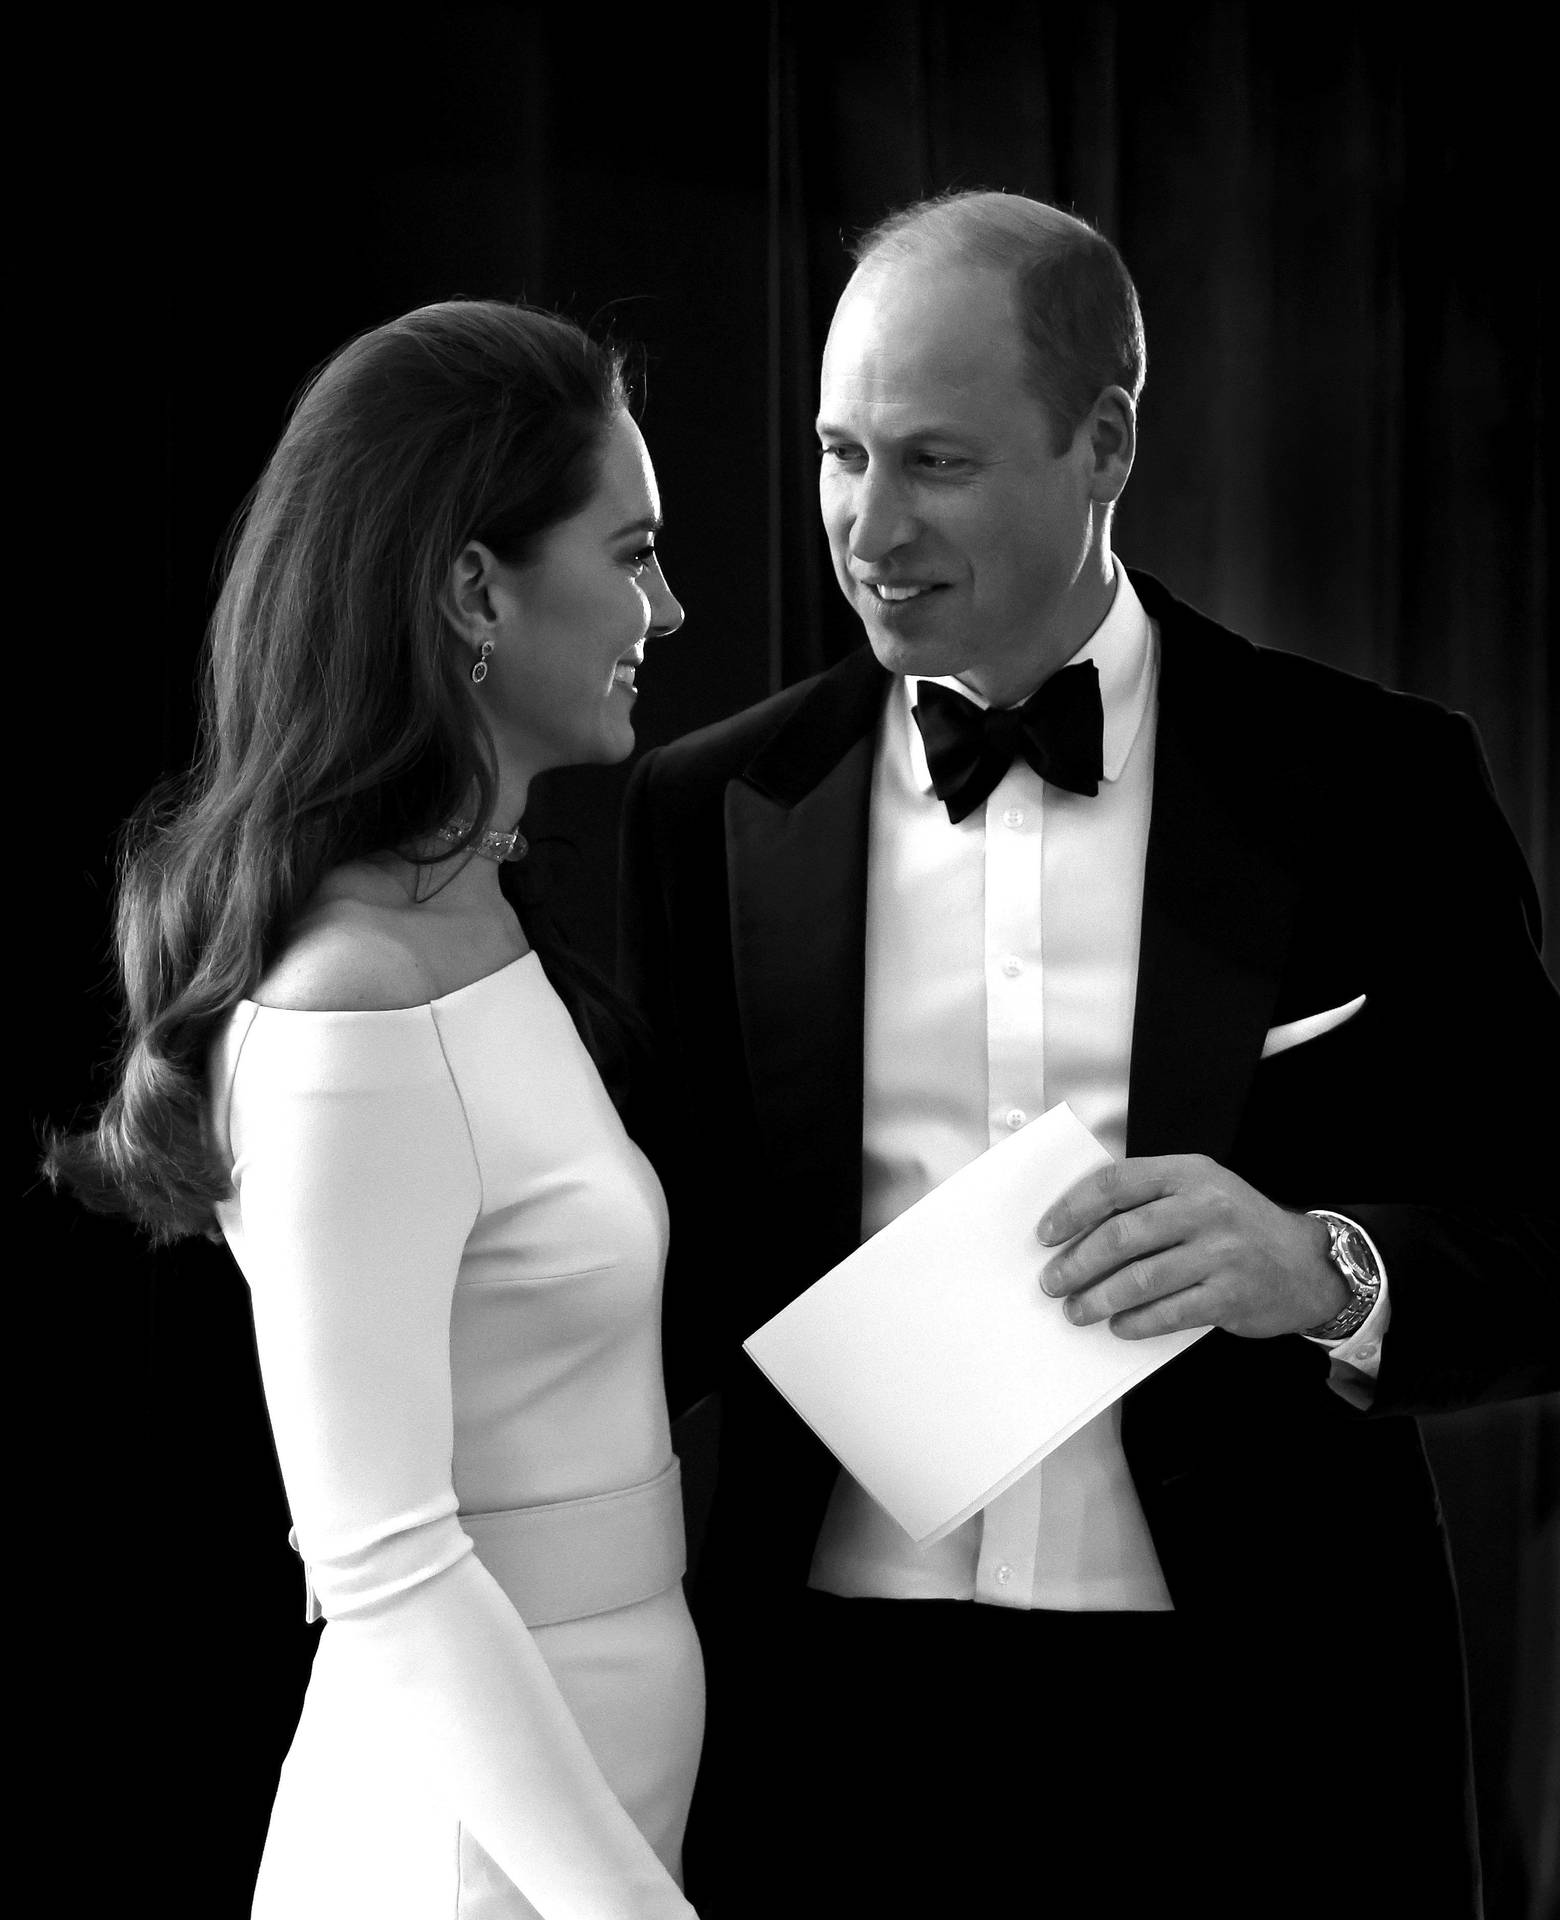 Monochrome Prince William And Kate Middleton Background